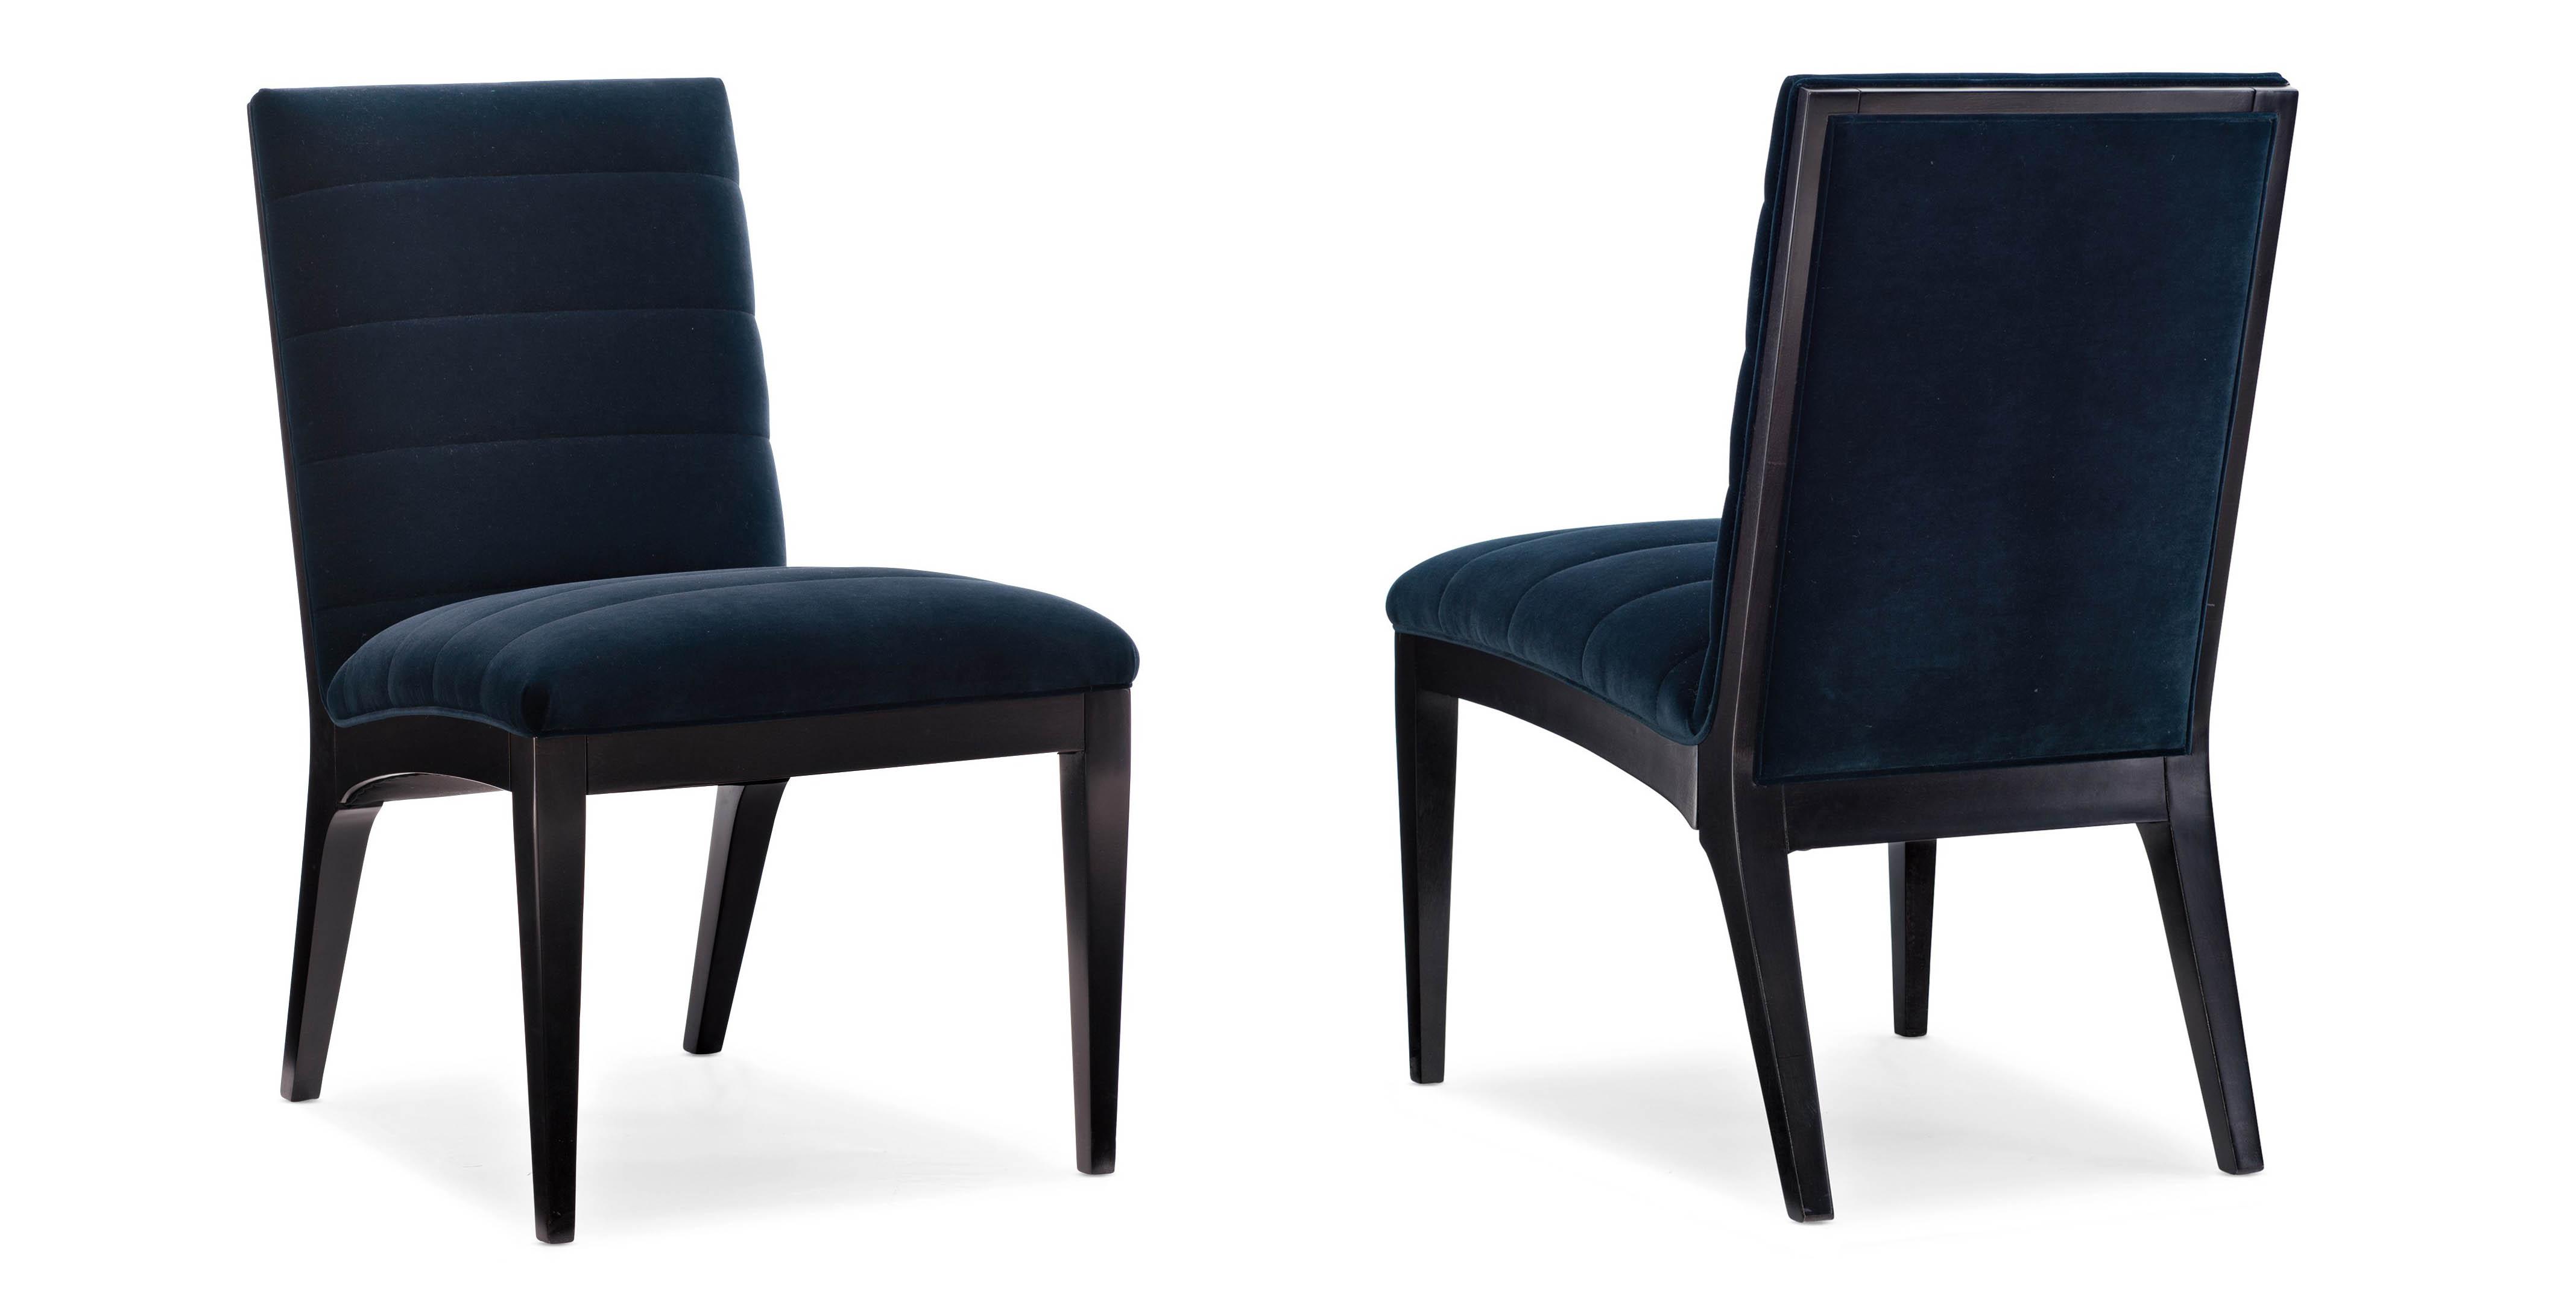 Contemporary Dining Chair Set EDGE SIDE CHAIR M102-419-281-Set-2 in Prussian blue Fabric